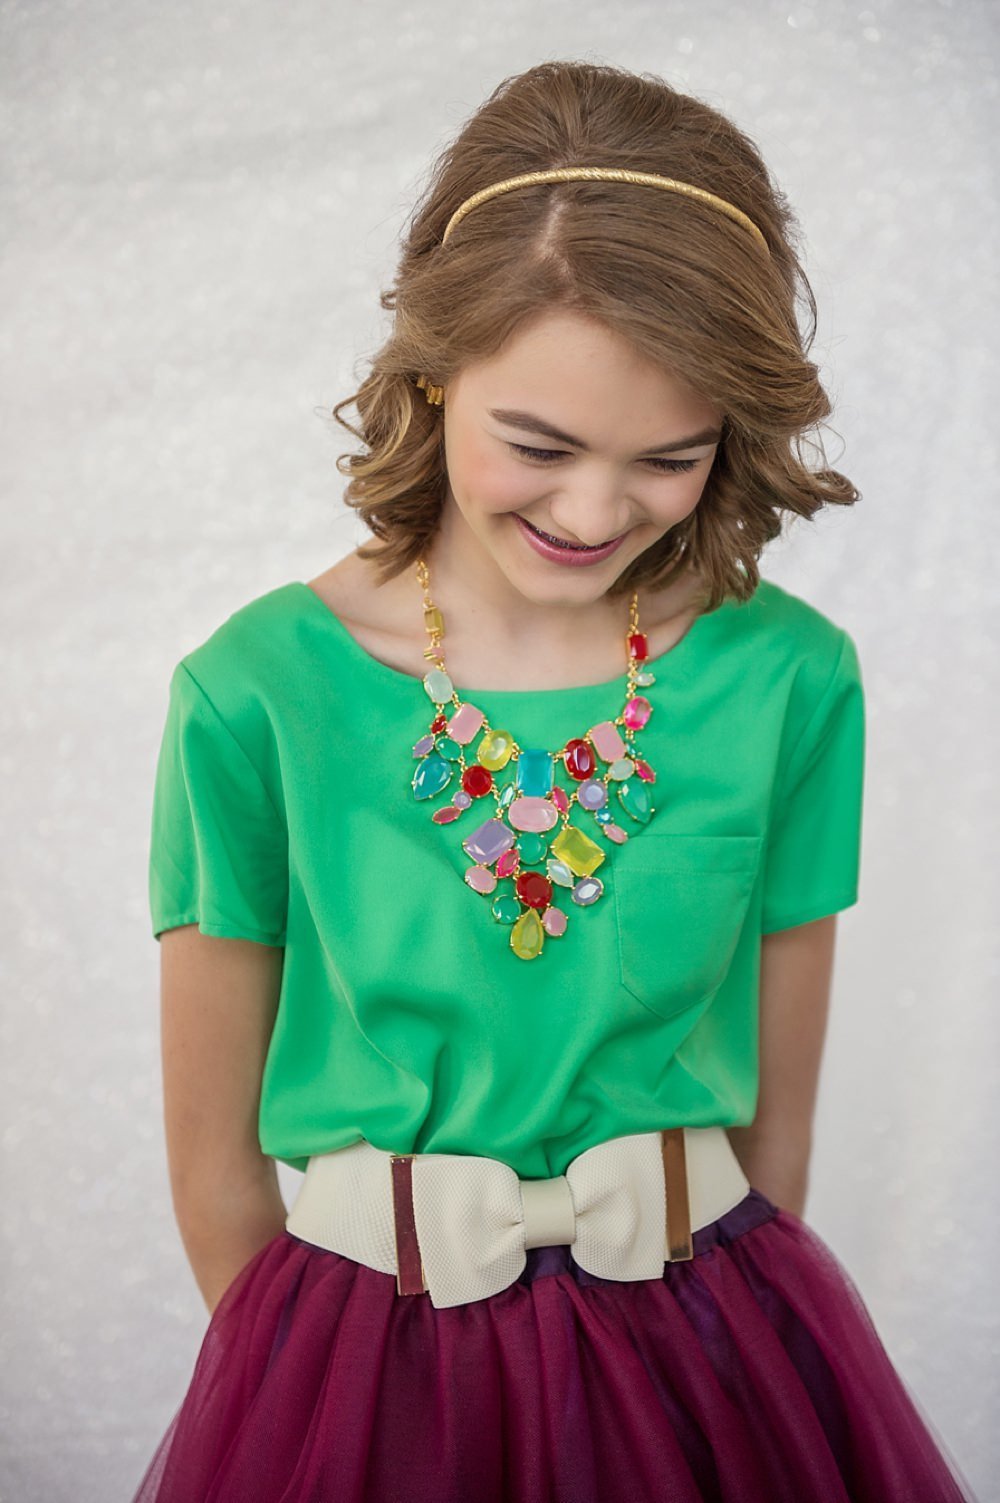 Colorful pre-teen outfit ideas